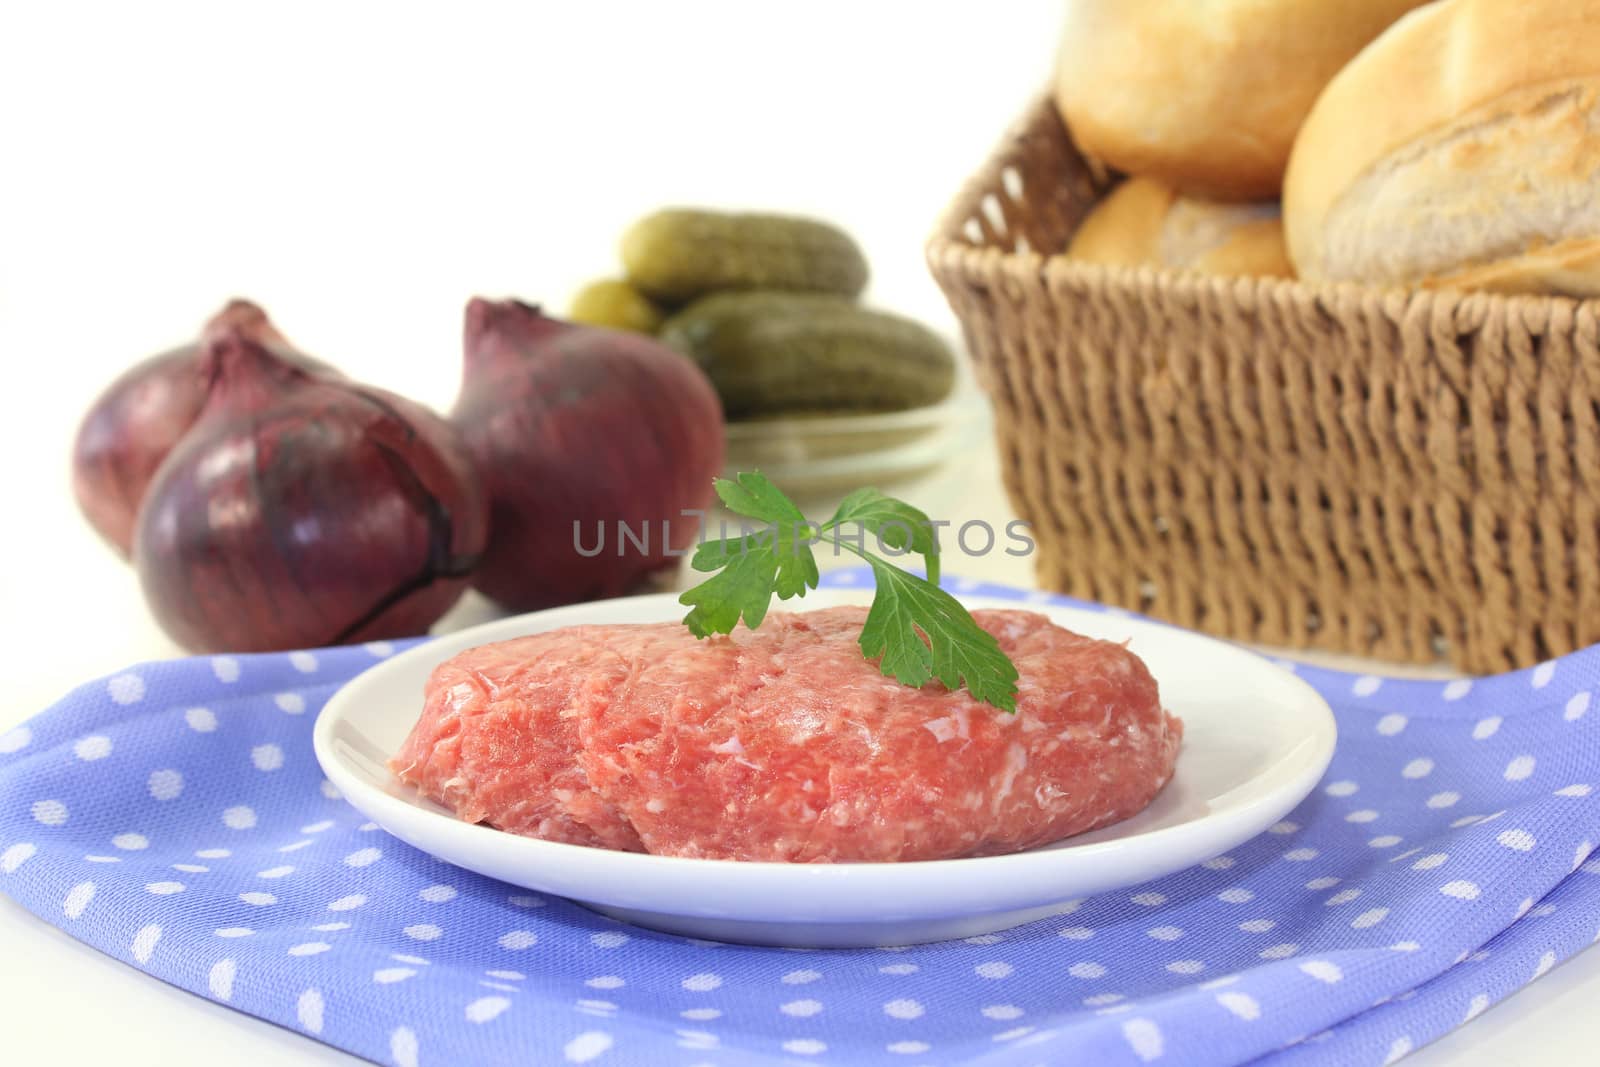 raw minced meat and parsley on a white plate